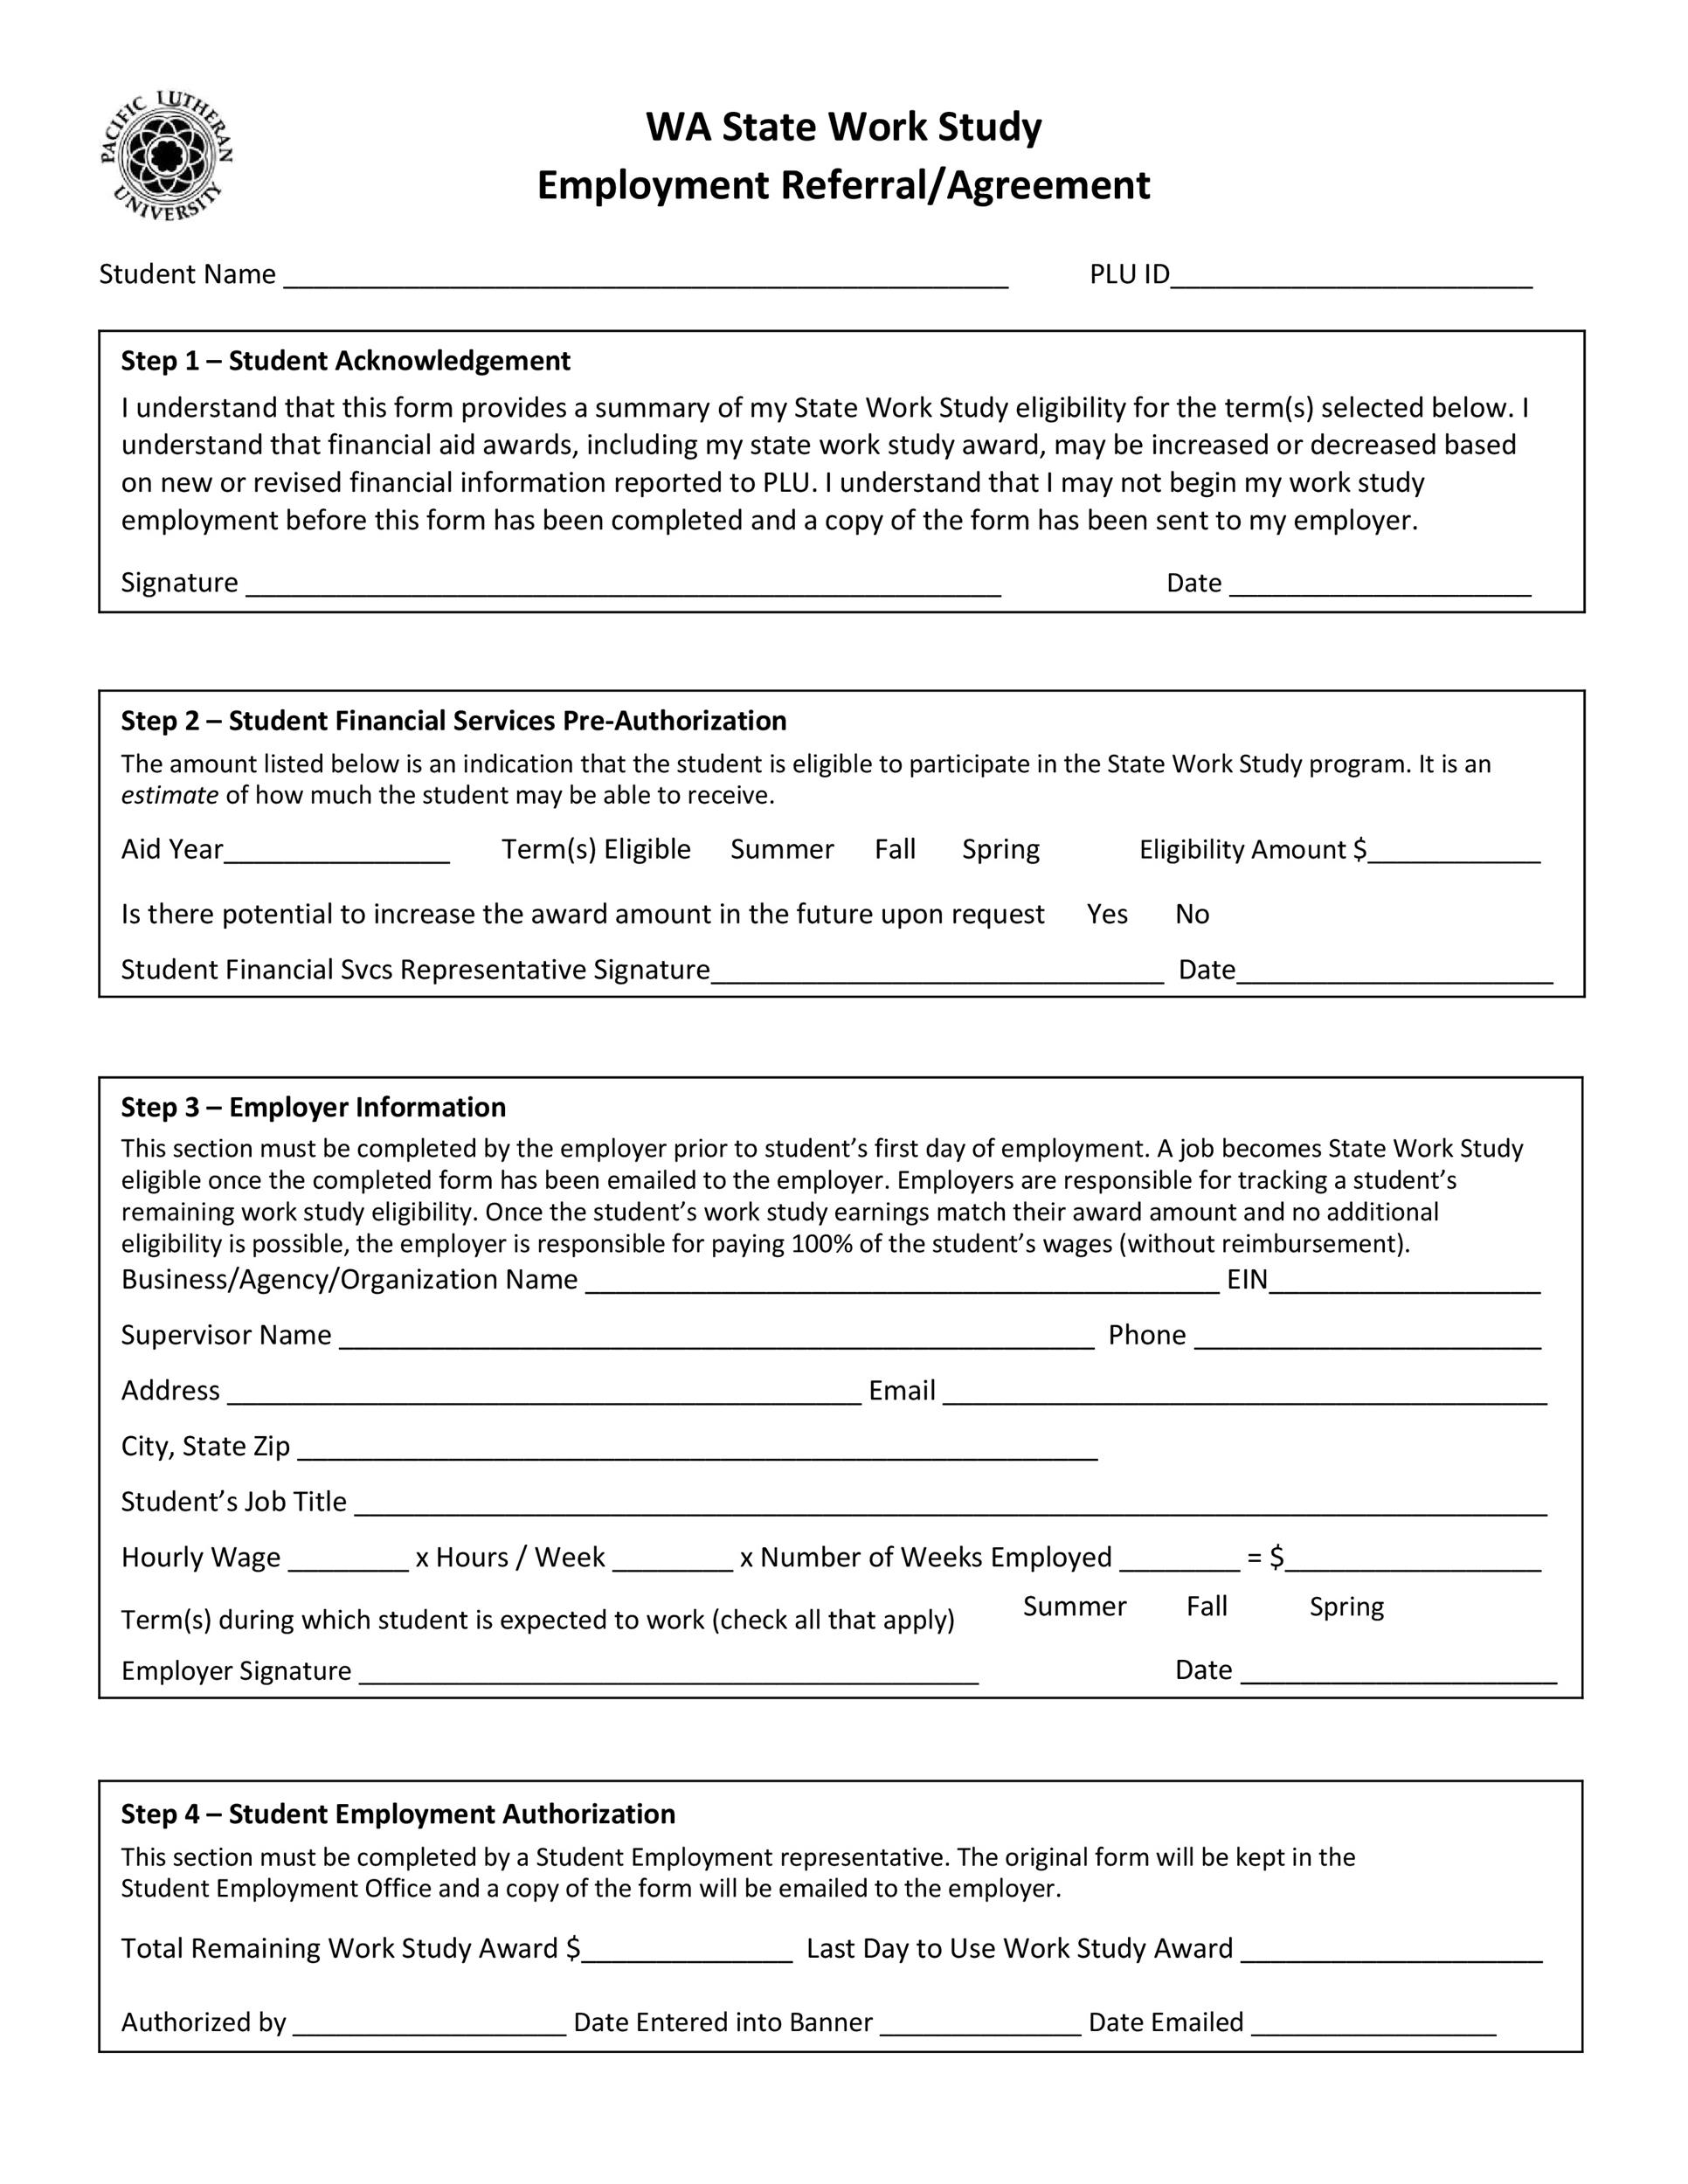 Free referral agreement template 28